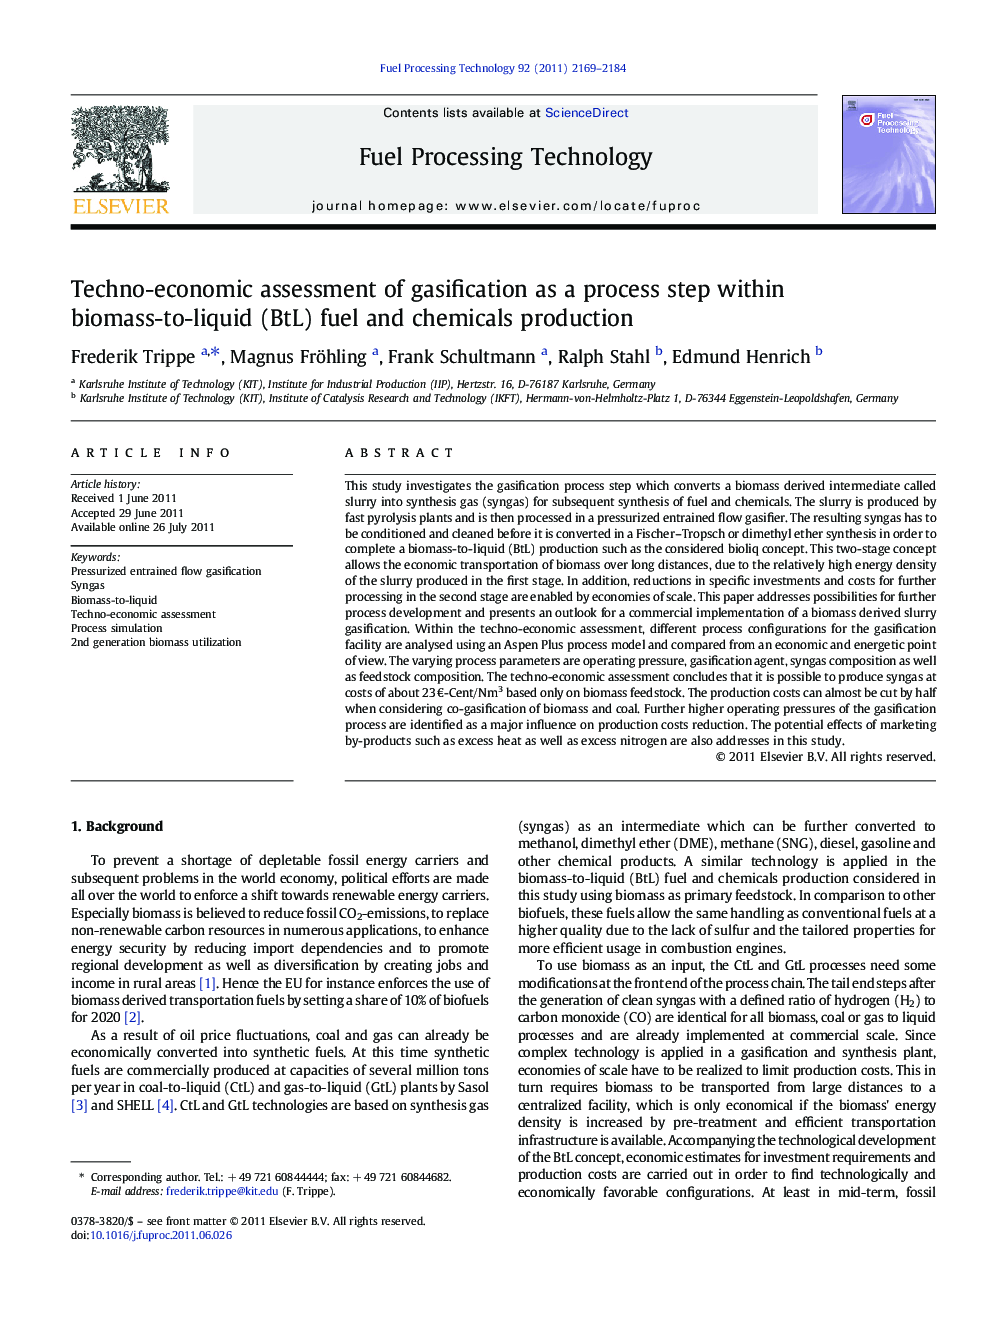 Techno-economic assessment of gasification as a process step within biomass-to-liquid (BtL) fuel and chemicals production